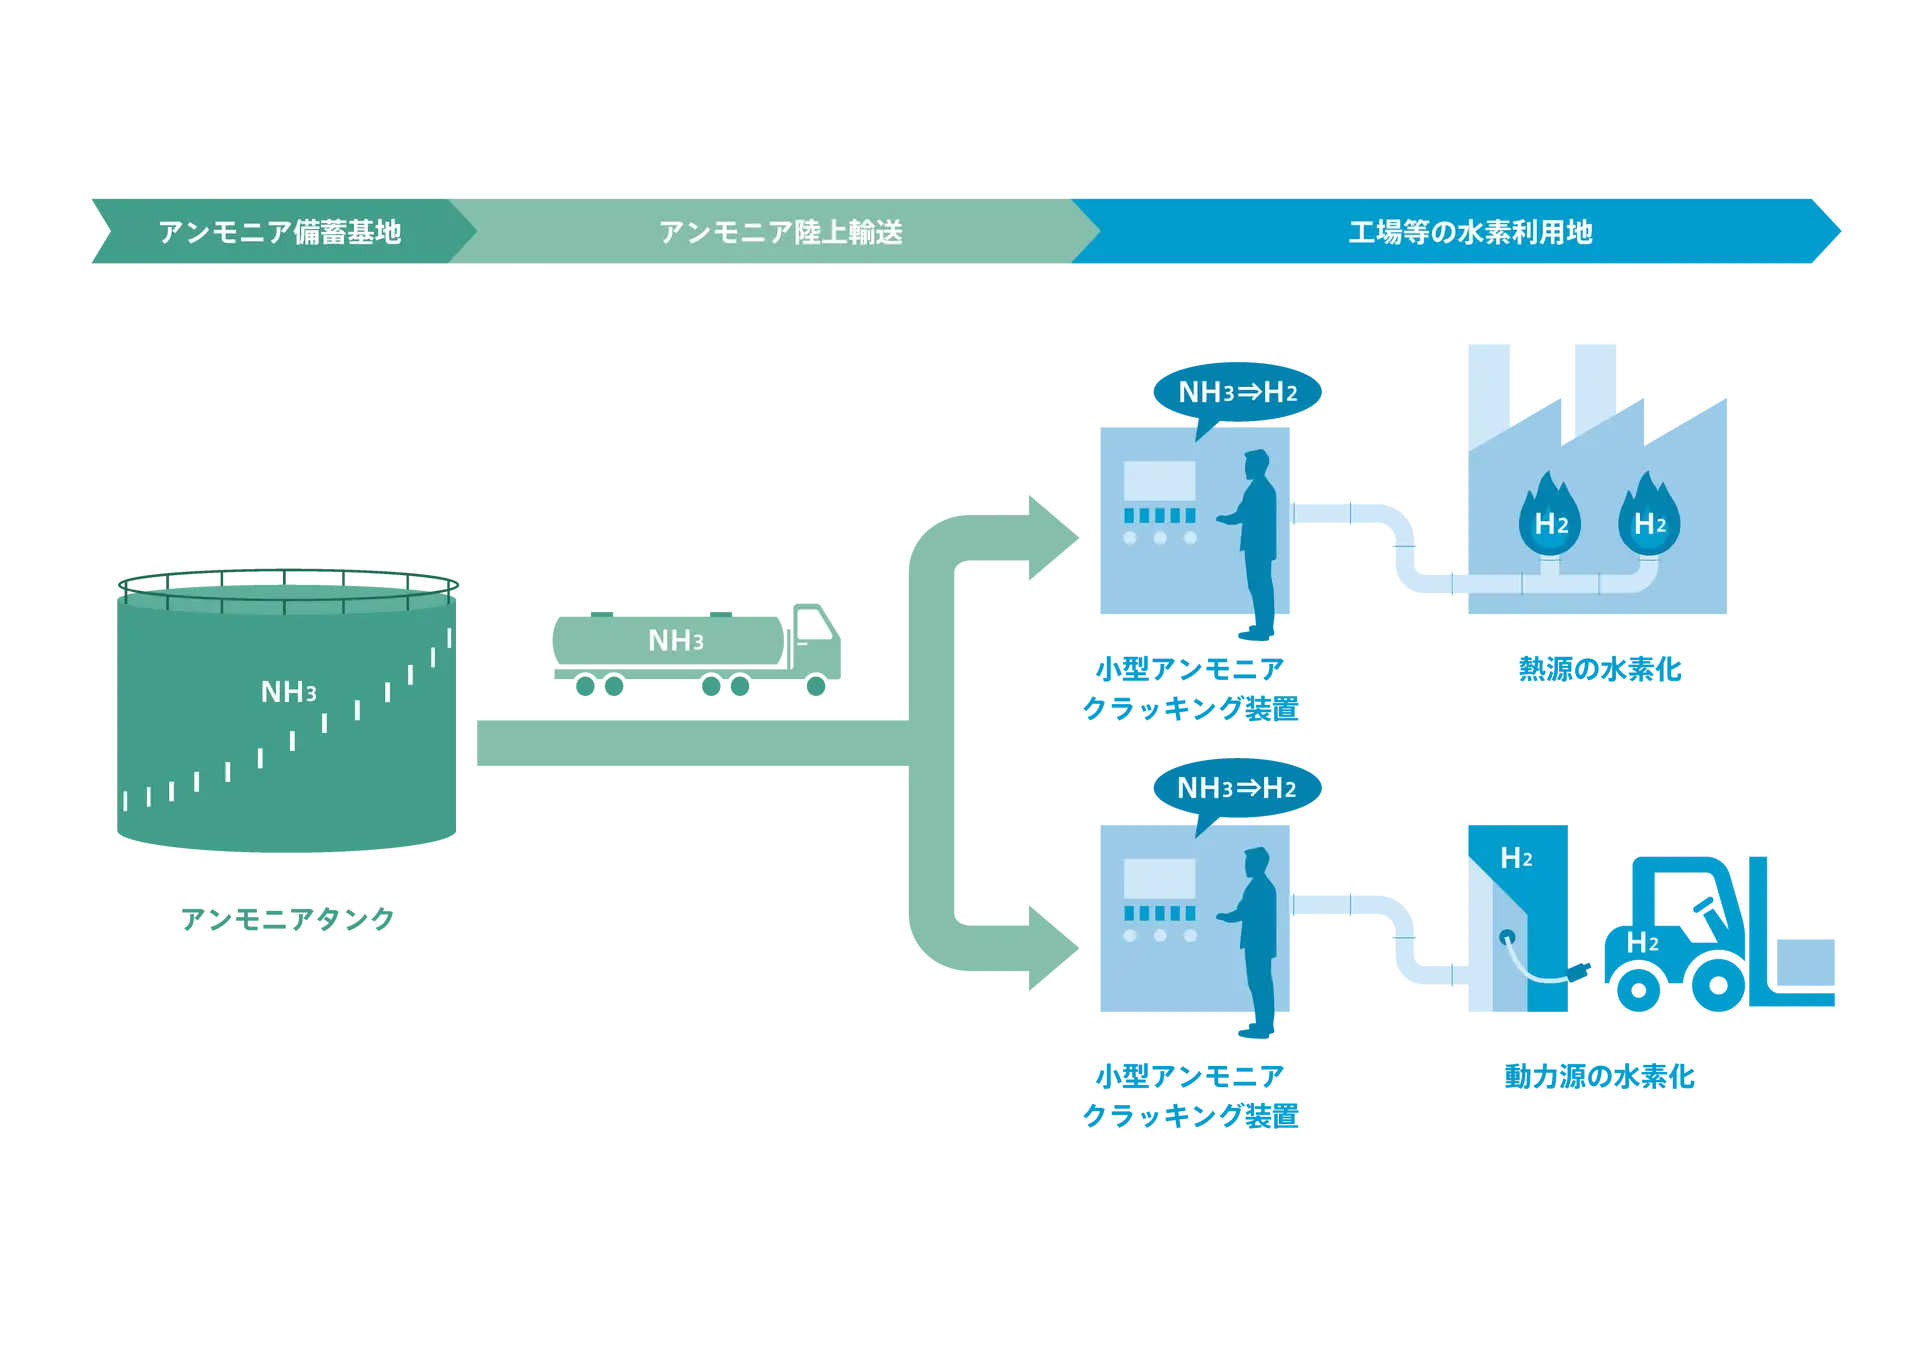 New ammonia cracking systems under-development in Japan